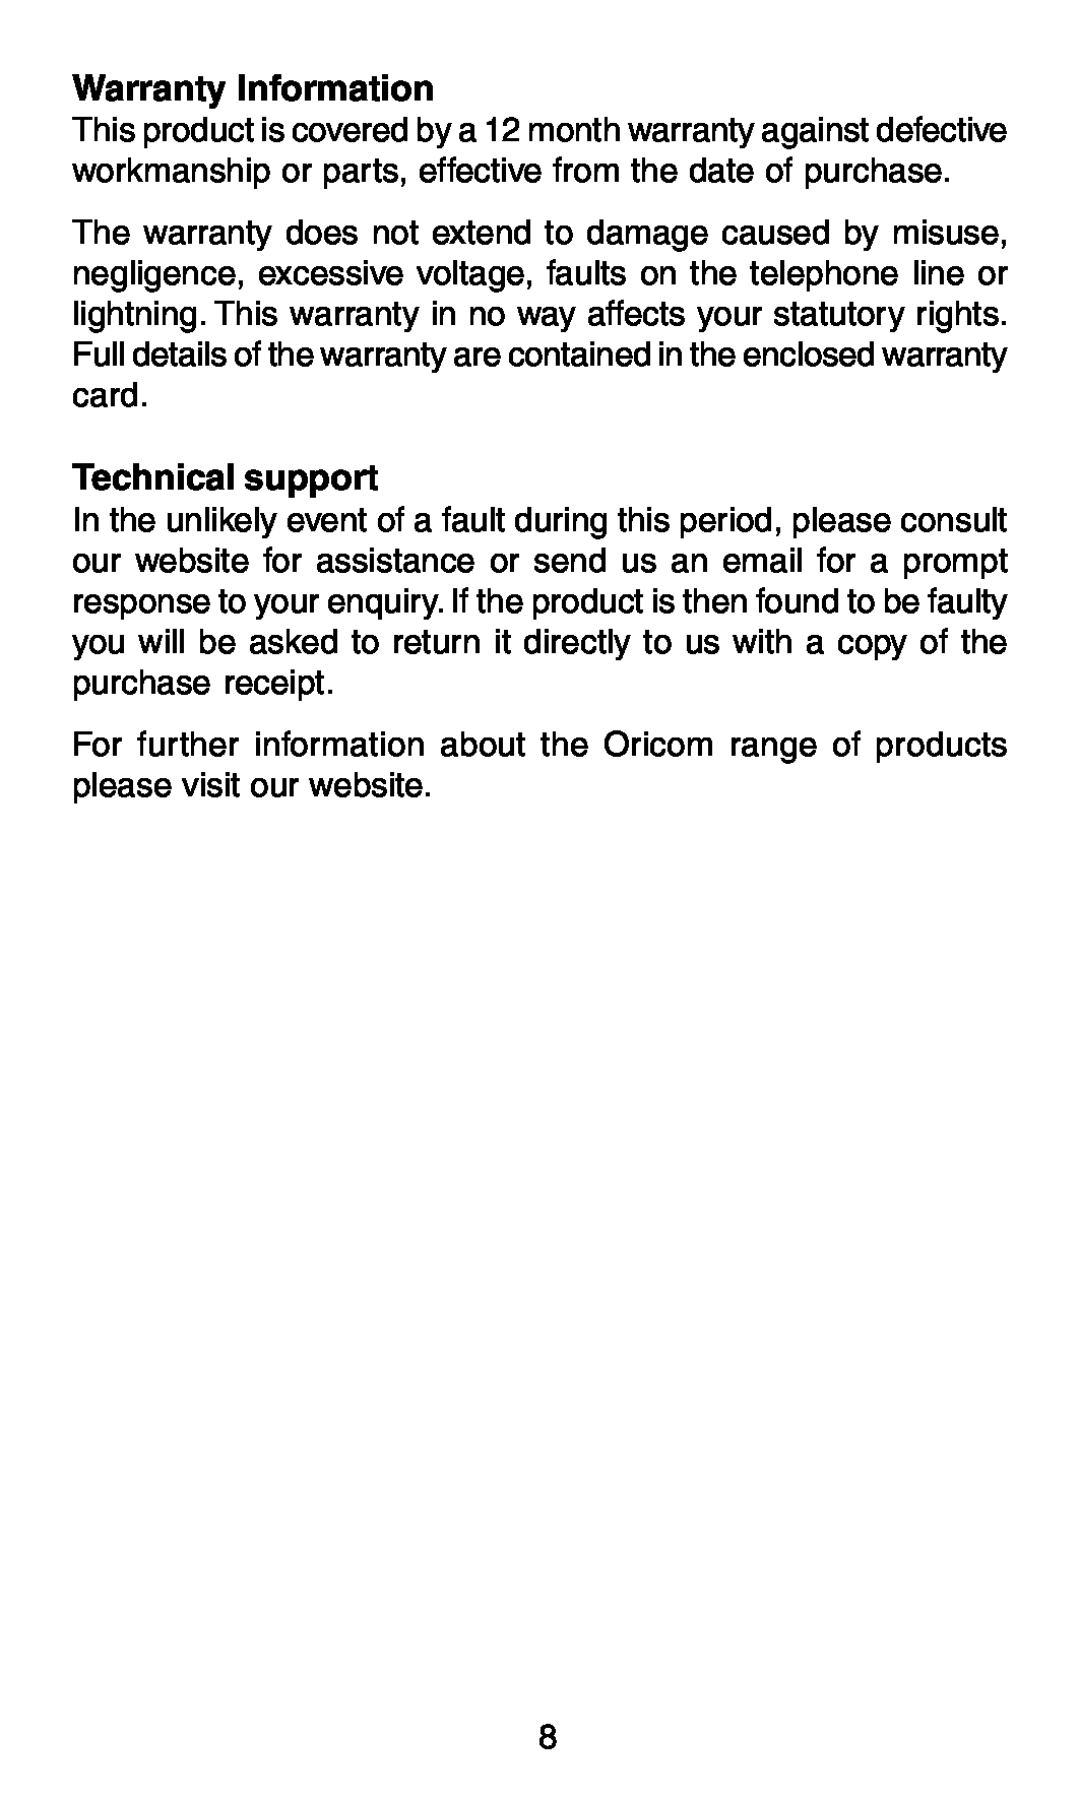 Oricom TP58 manual Warranty Information, Technical support 